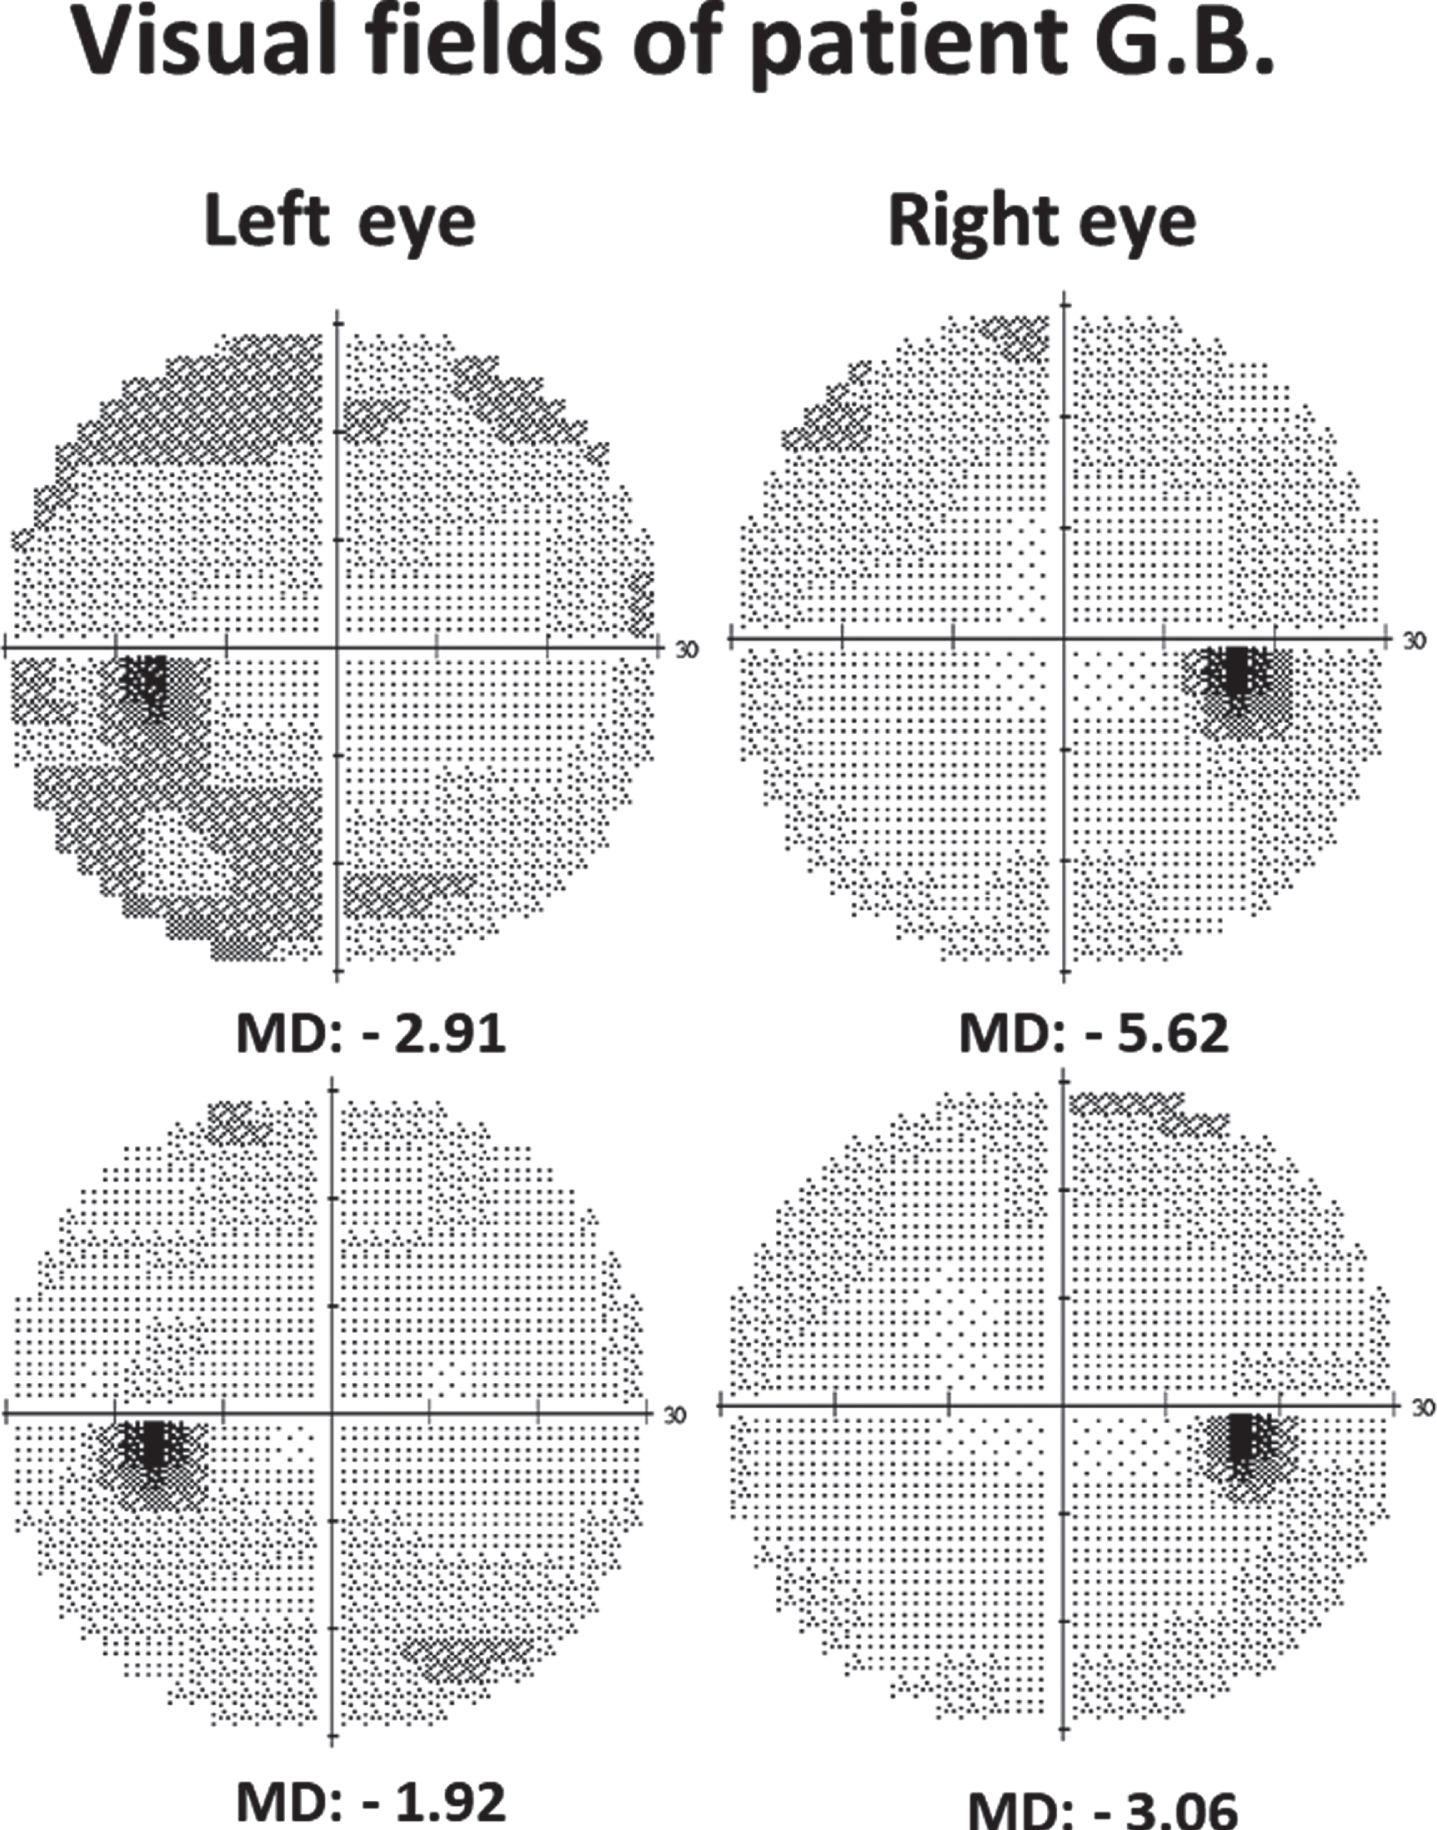 Recovery of 30-degree Humphrey visual field in patient G.B. following NIBS treatment (MD = mean deviation: lower negative values (i.e., closer to zero) indicate more vision in this perimetry).